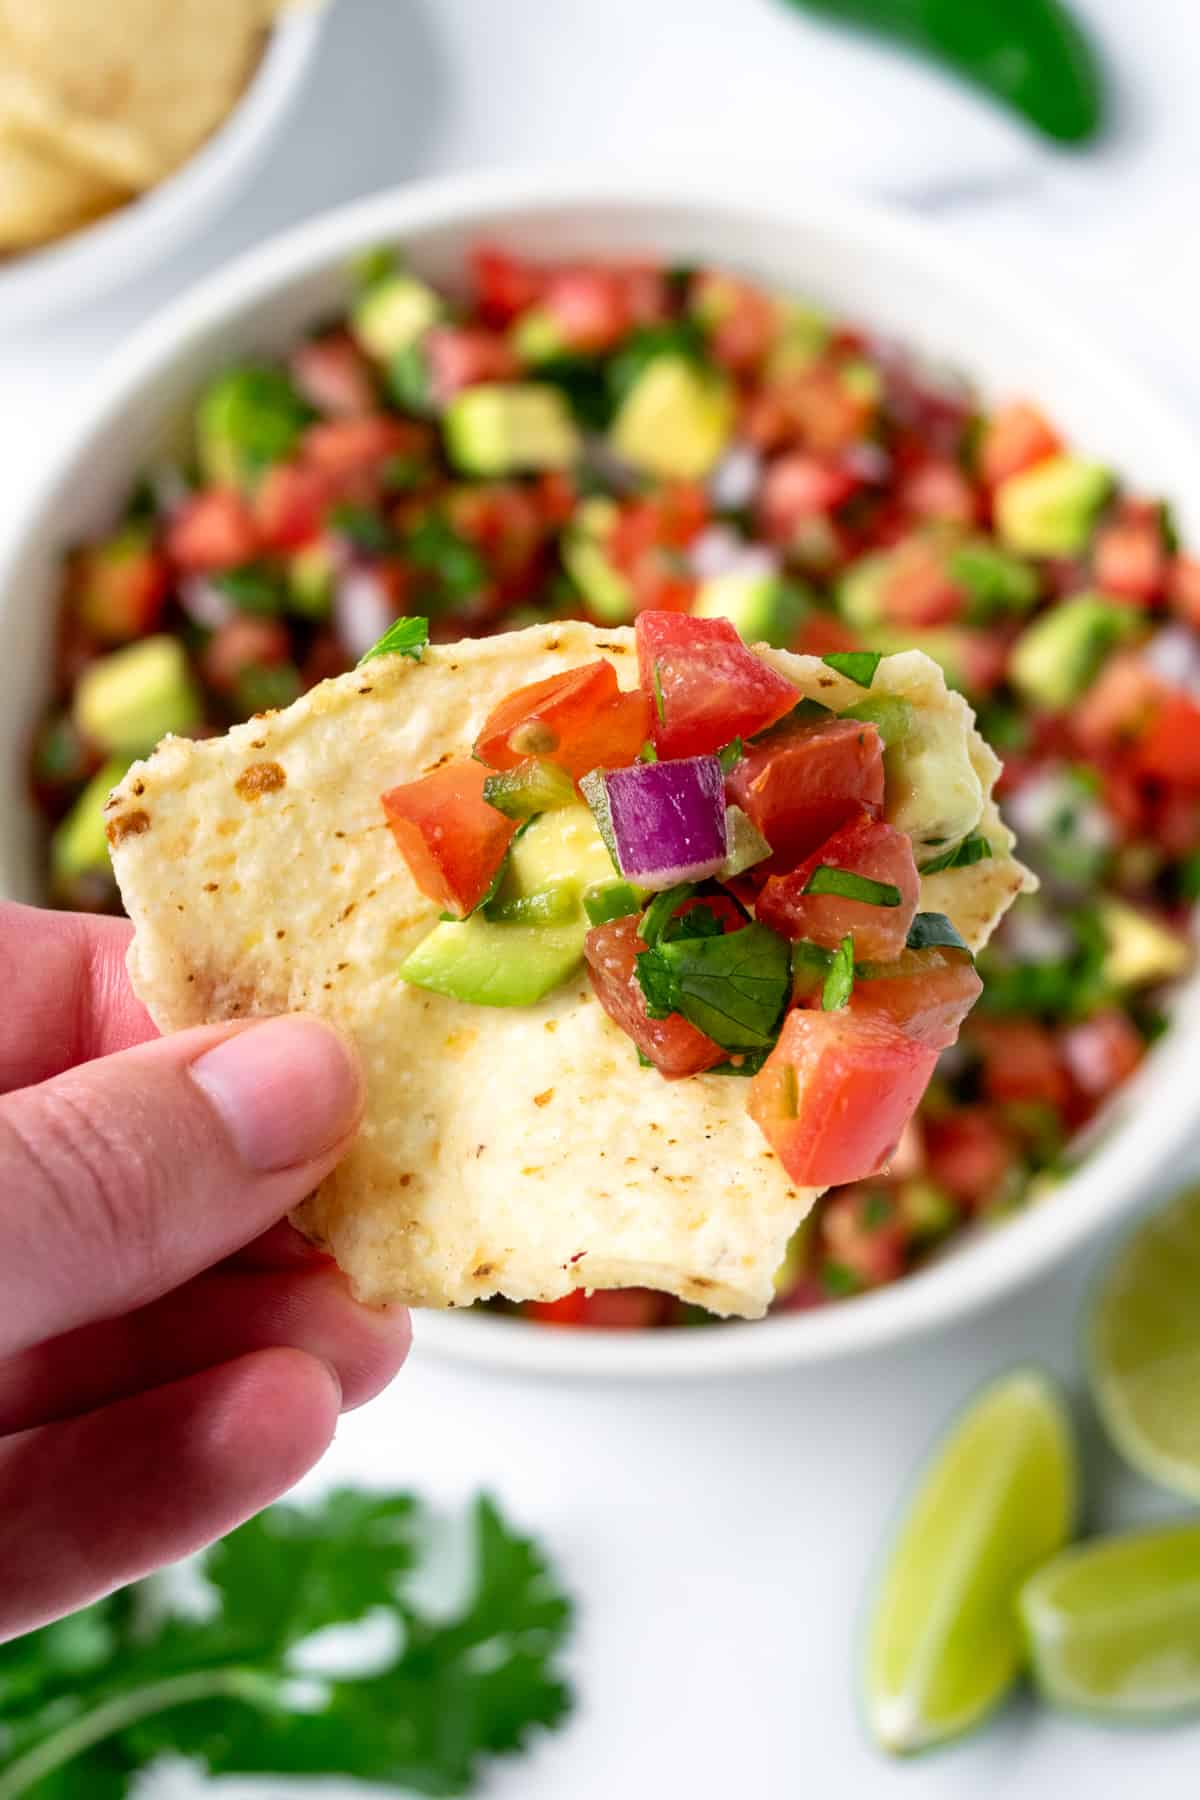 A hand holding a tortilla chip with pico de gallo with avocado on it.